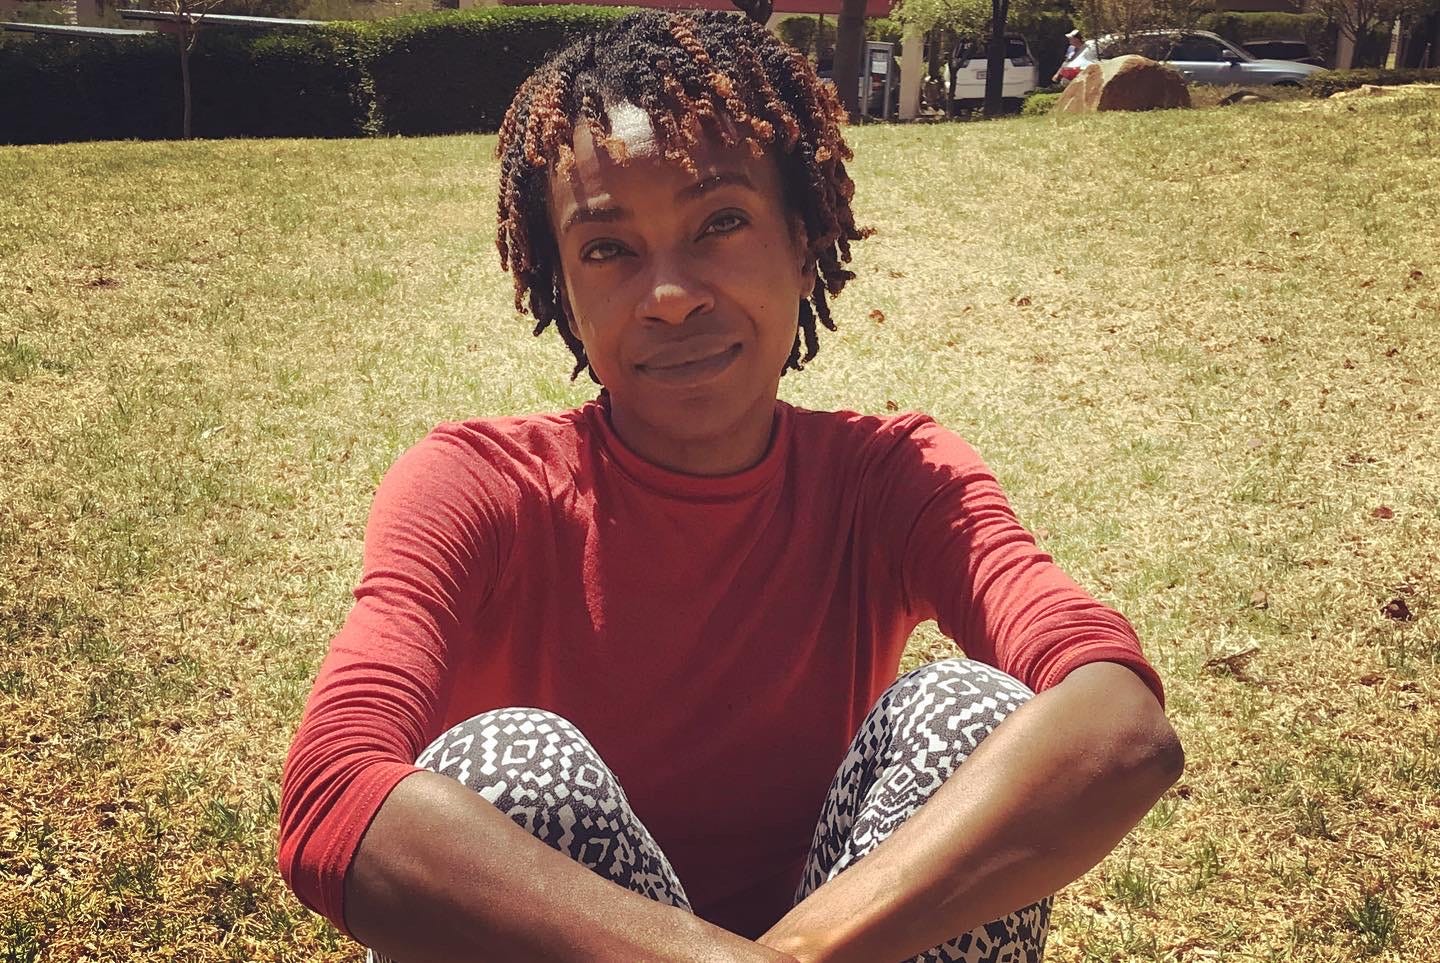 Akilah with two-strand twists, a red shirt, and black and white tights. Seated in grass.